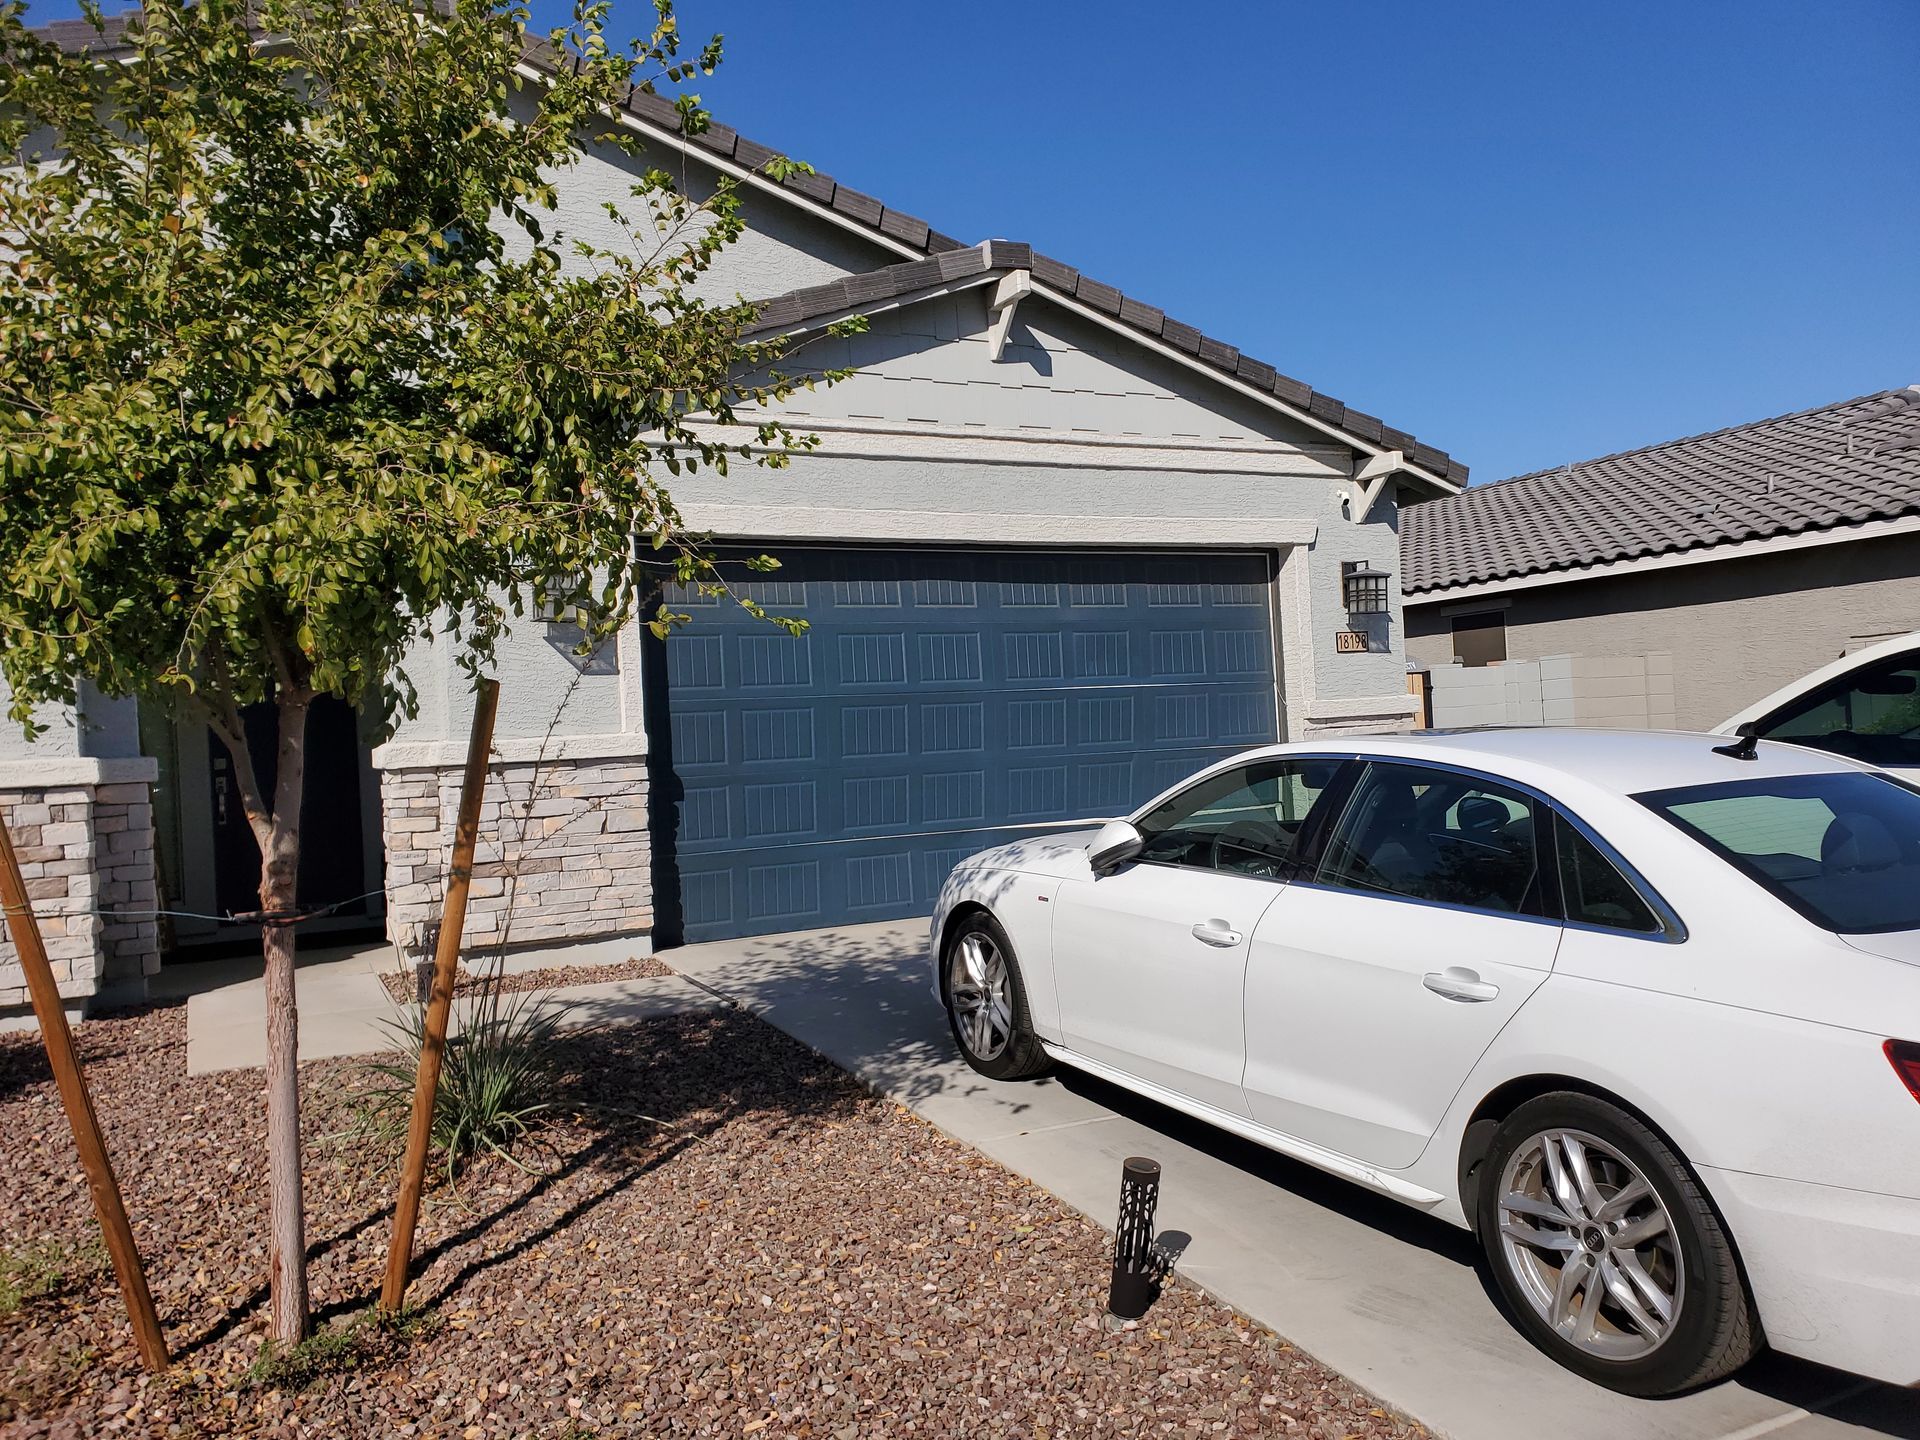 Before and after shots of a transformative garage door facelift in Gila Bend, AZ, by JCTZ experts.